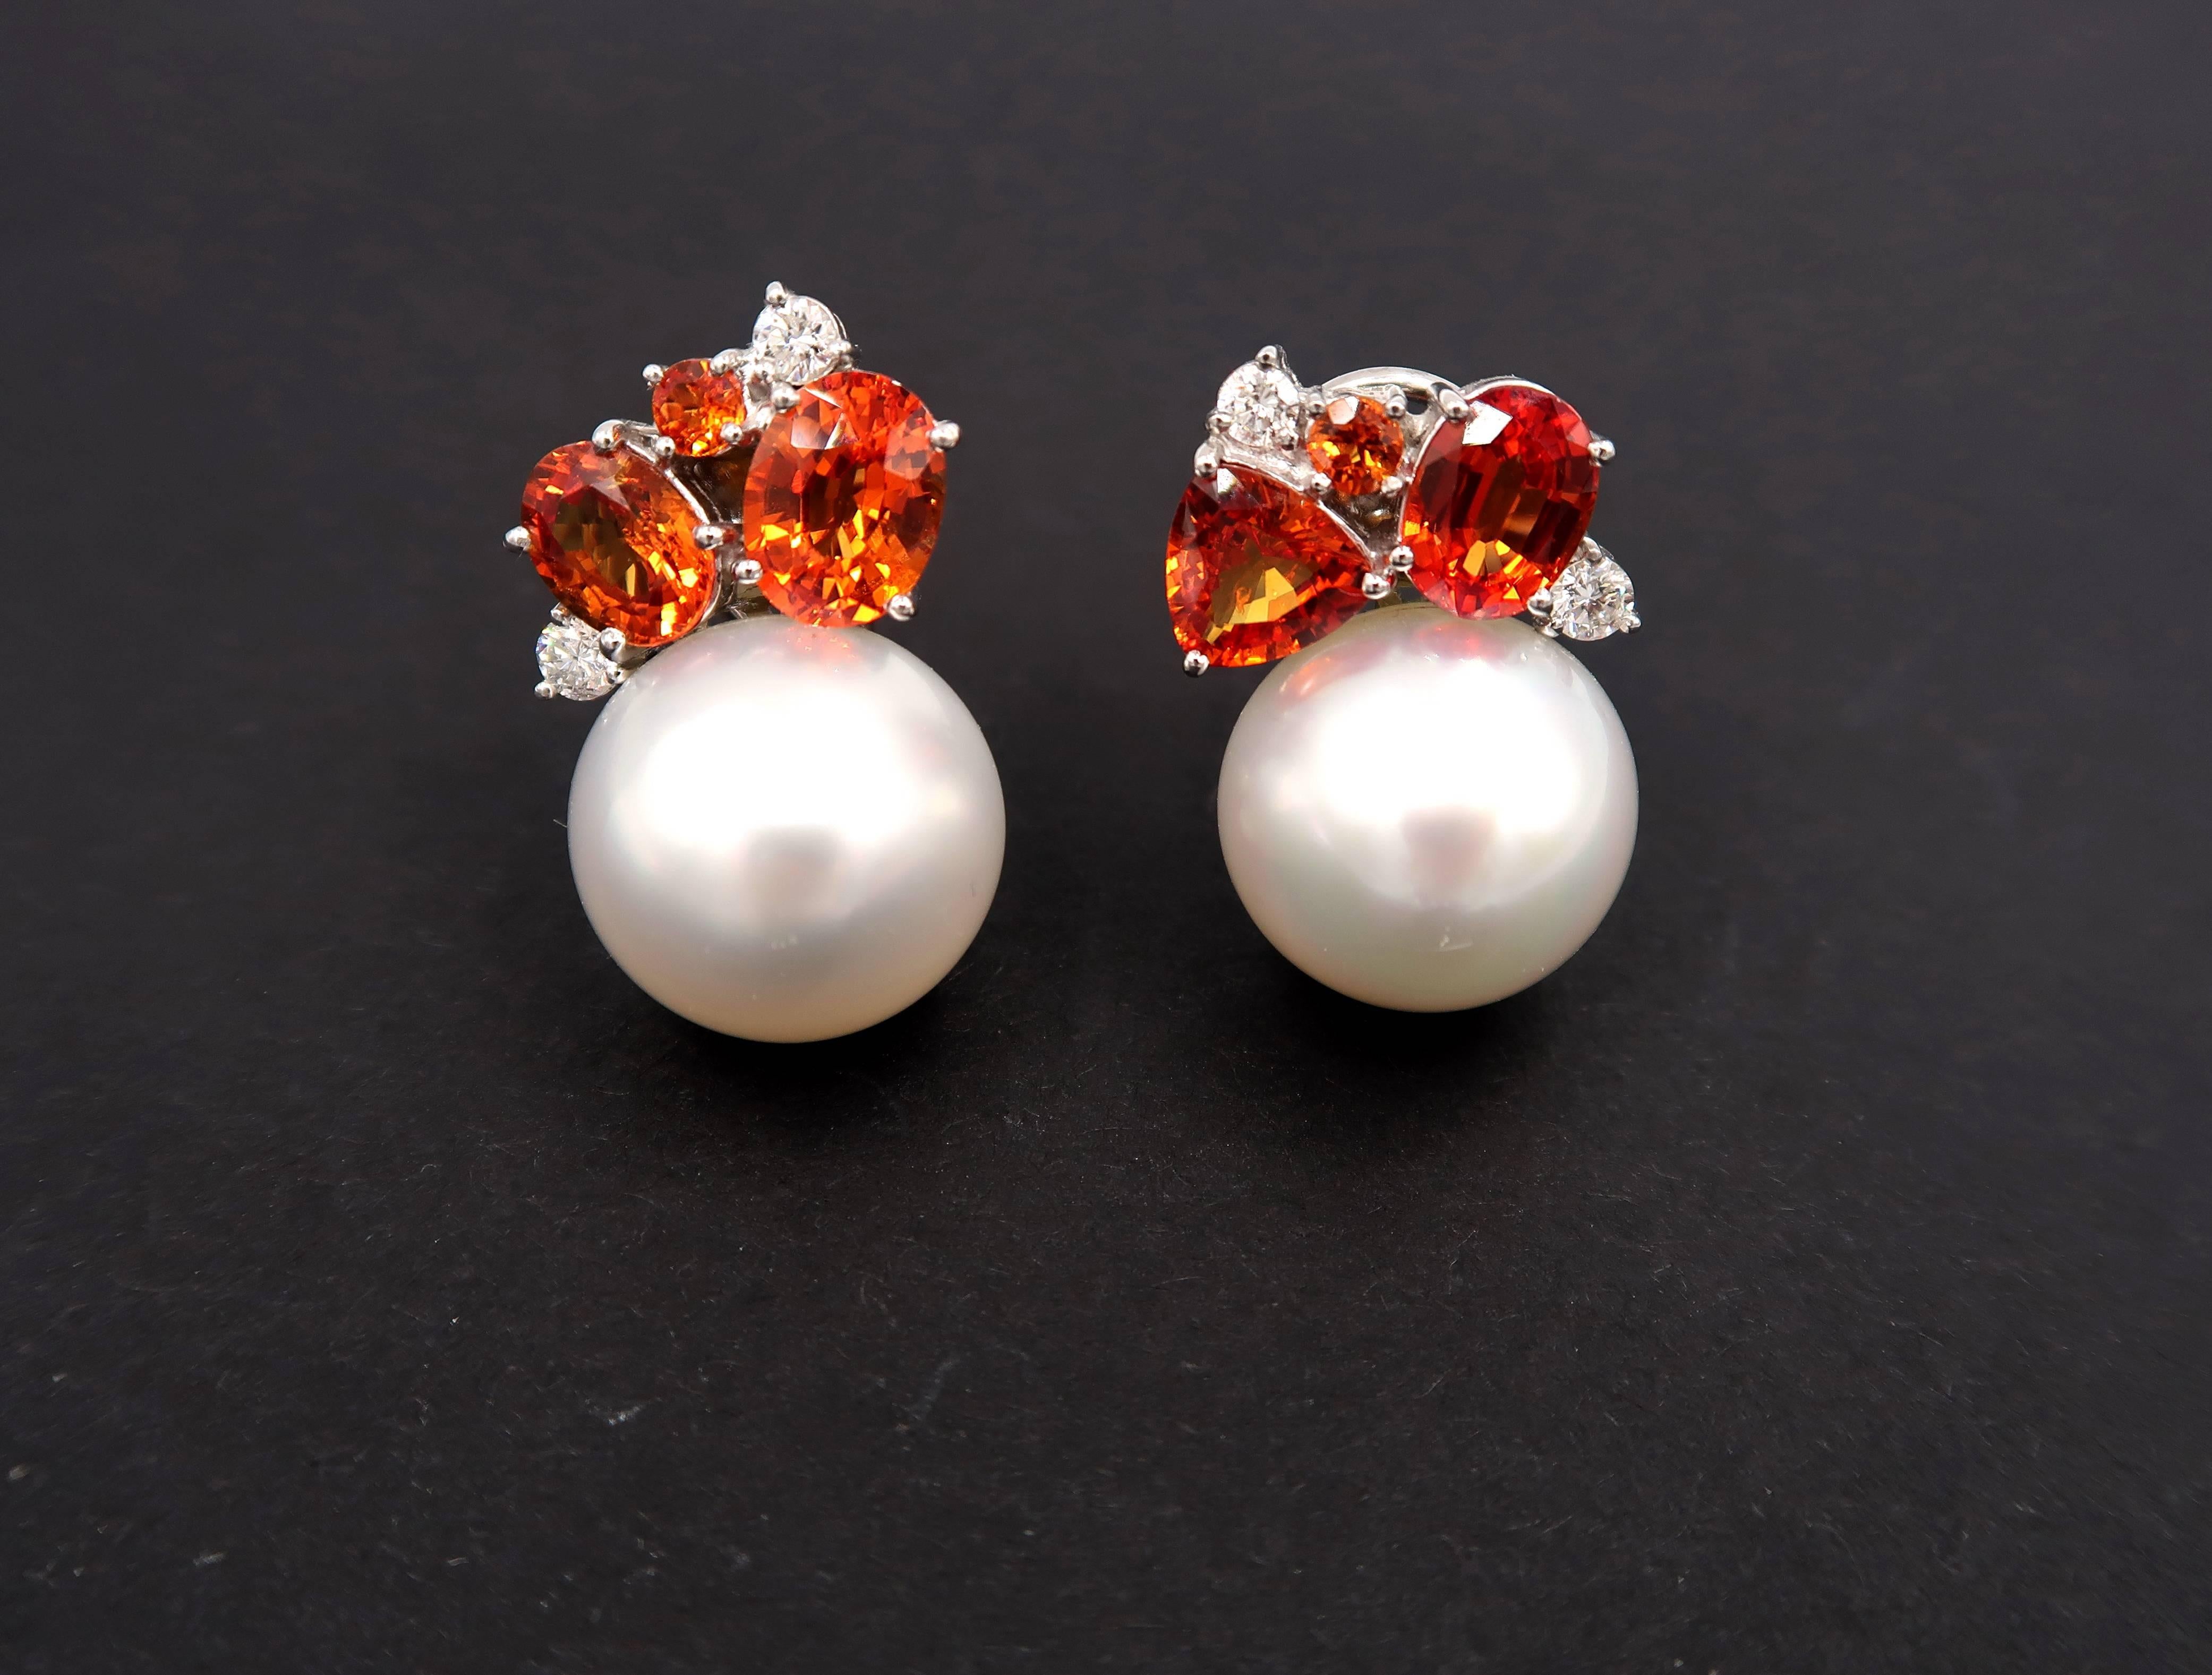 Orange Sapphire and Premium-sized White South Sea Pearl 18K White Gold Clip-on Earrings with Diamonds

Very intense orange sapphire. Good-sized pearls. Flattering on every earlobe.

Kindly let us know if you would like to have a different type of